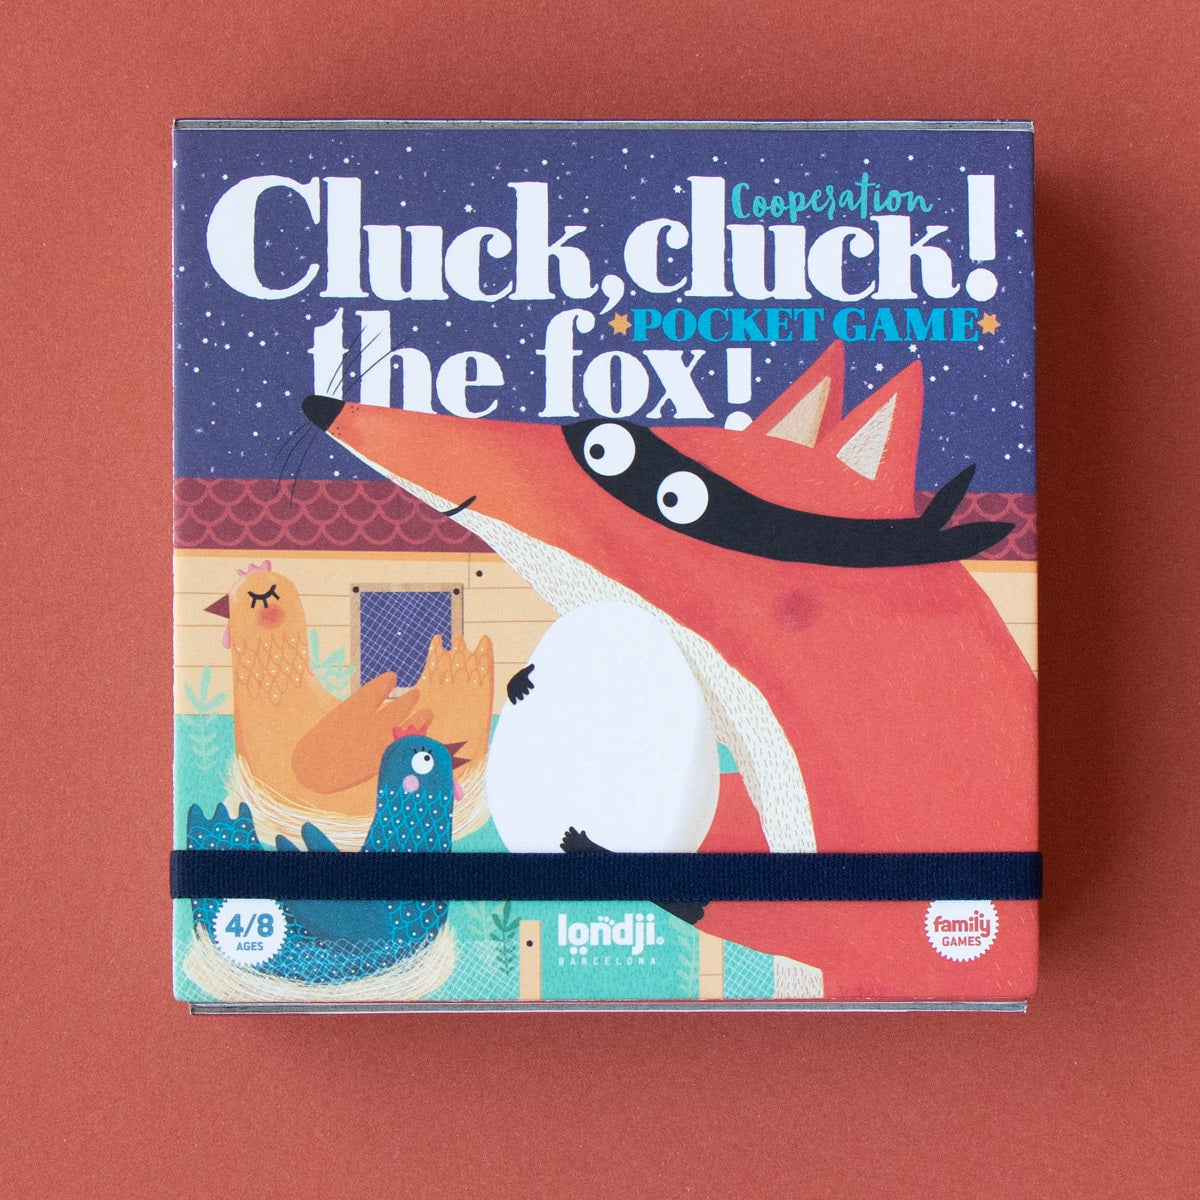 Cluck, Cluck! The Fox! - Pocket Edition Game